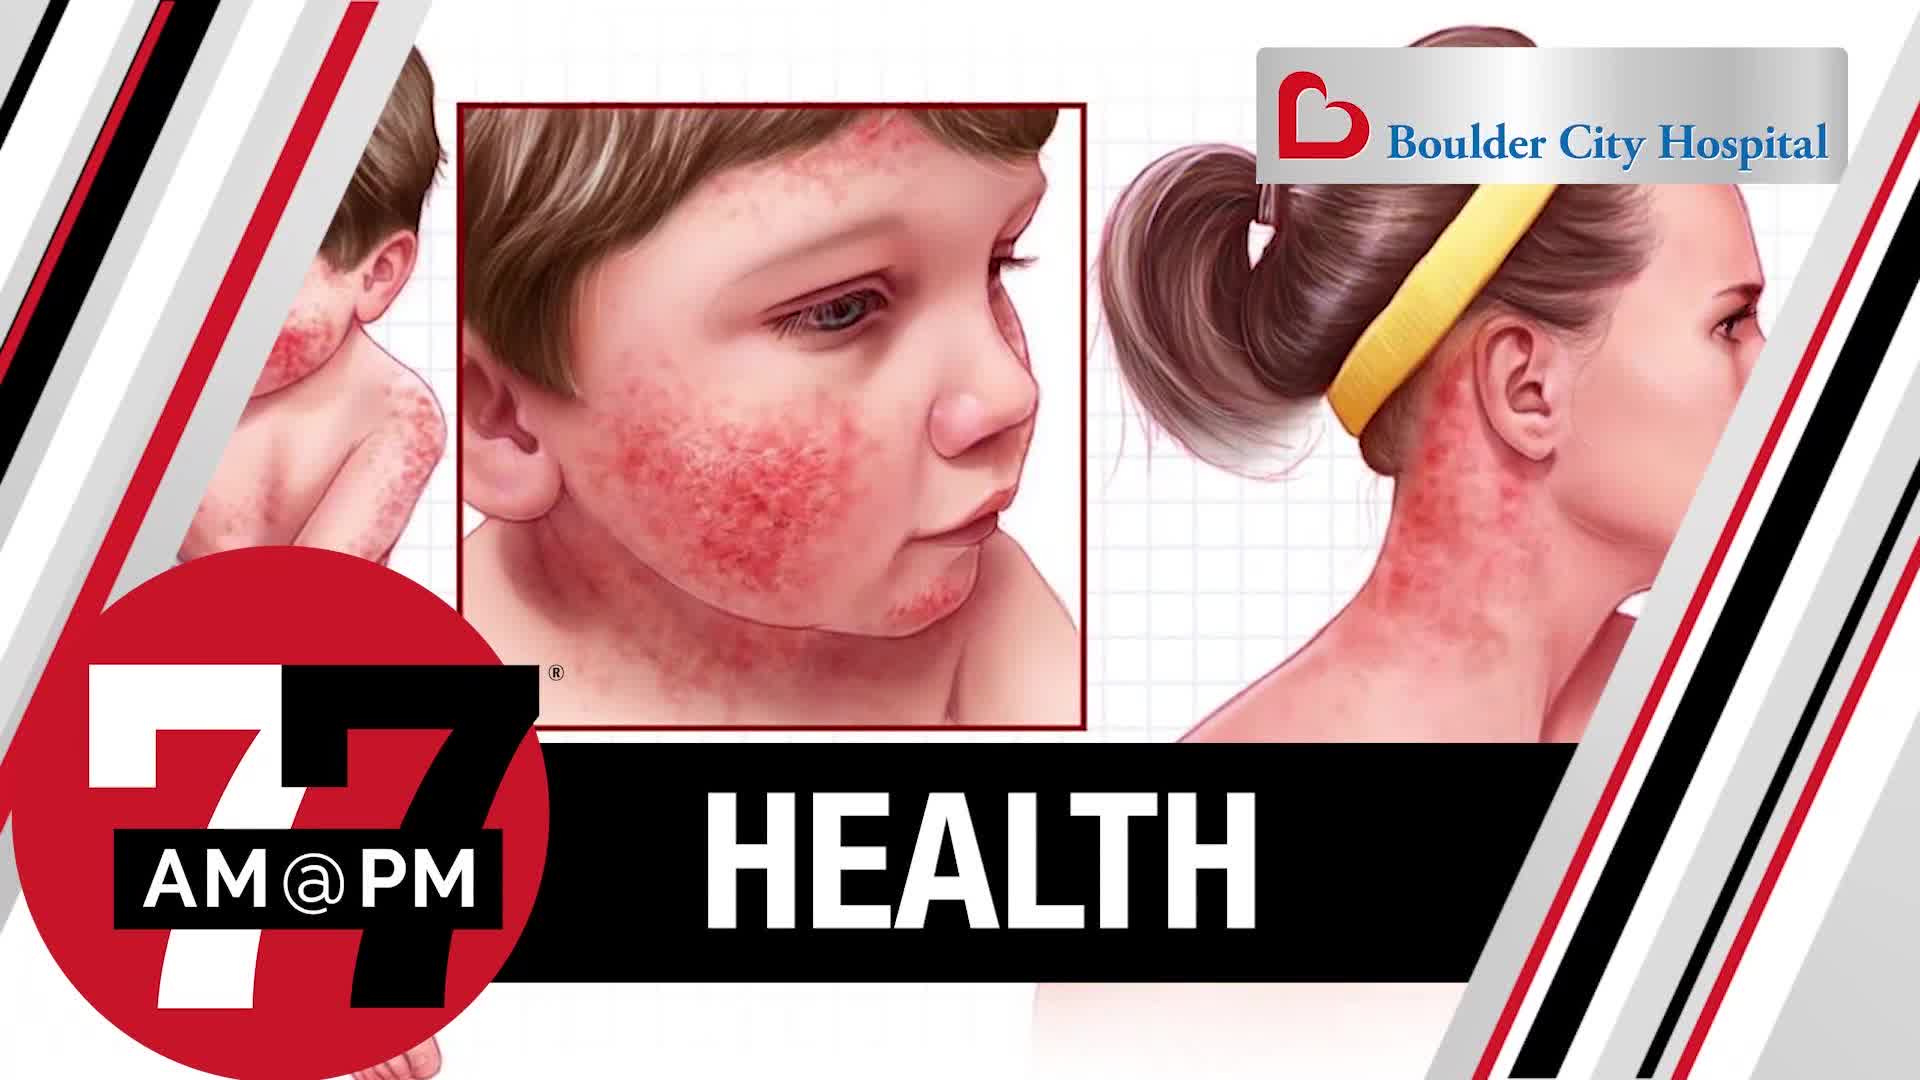 How to deal with eczema